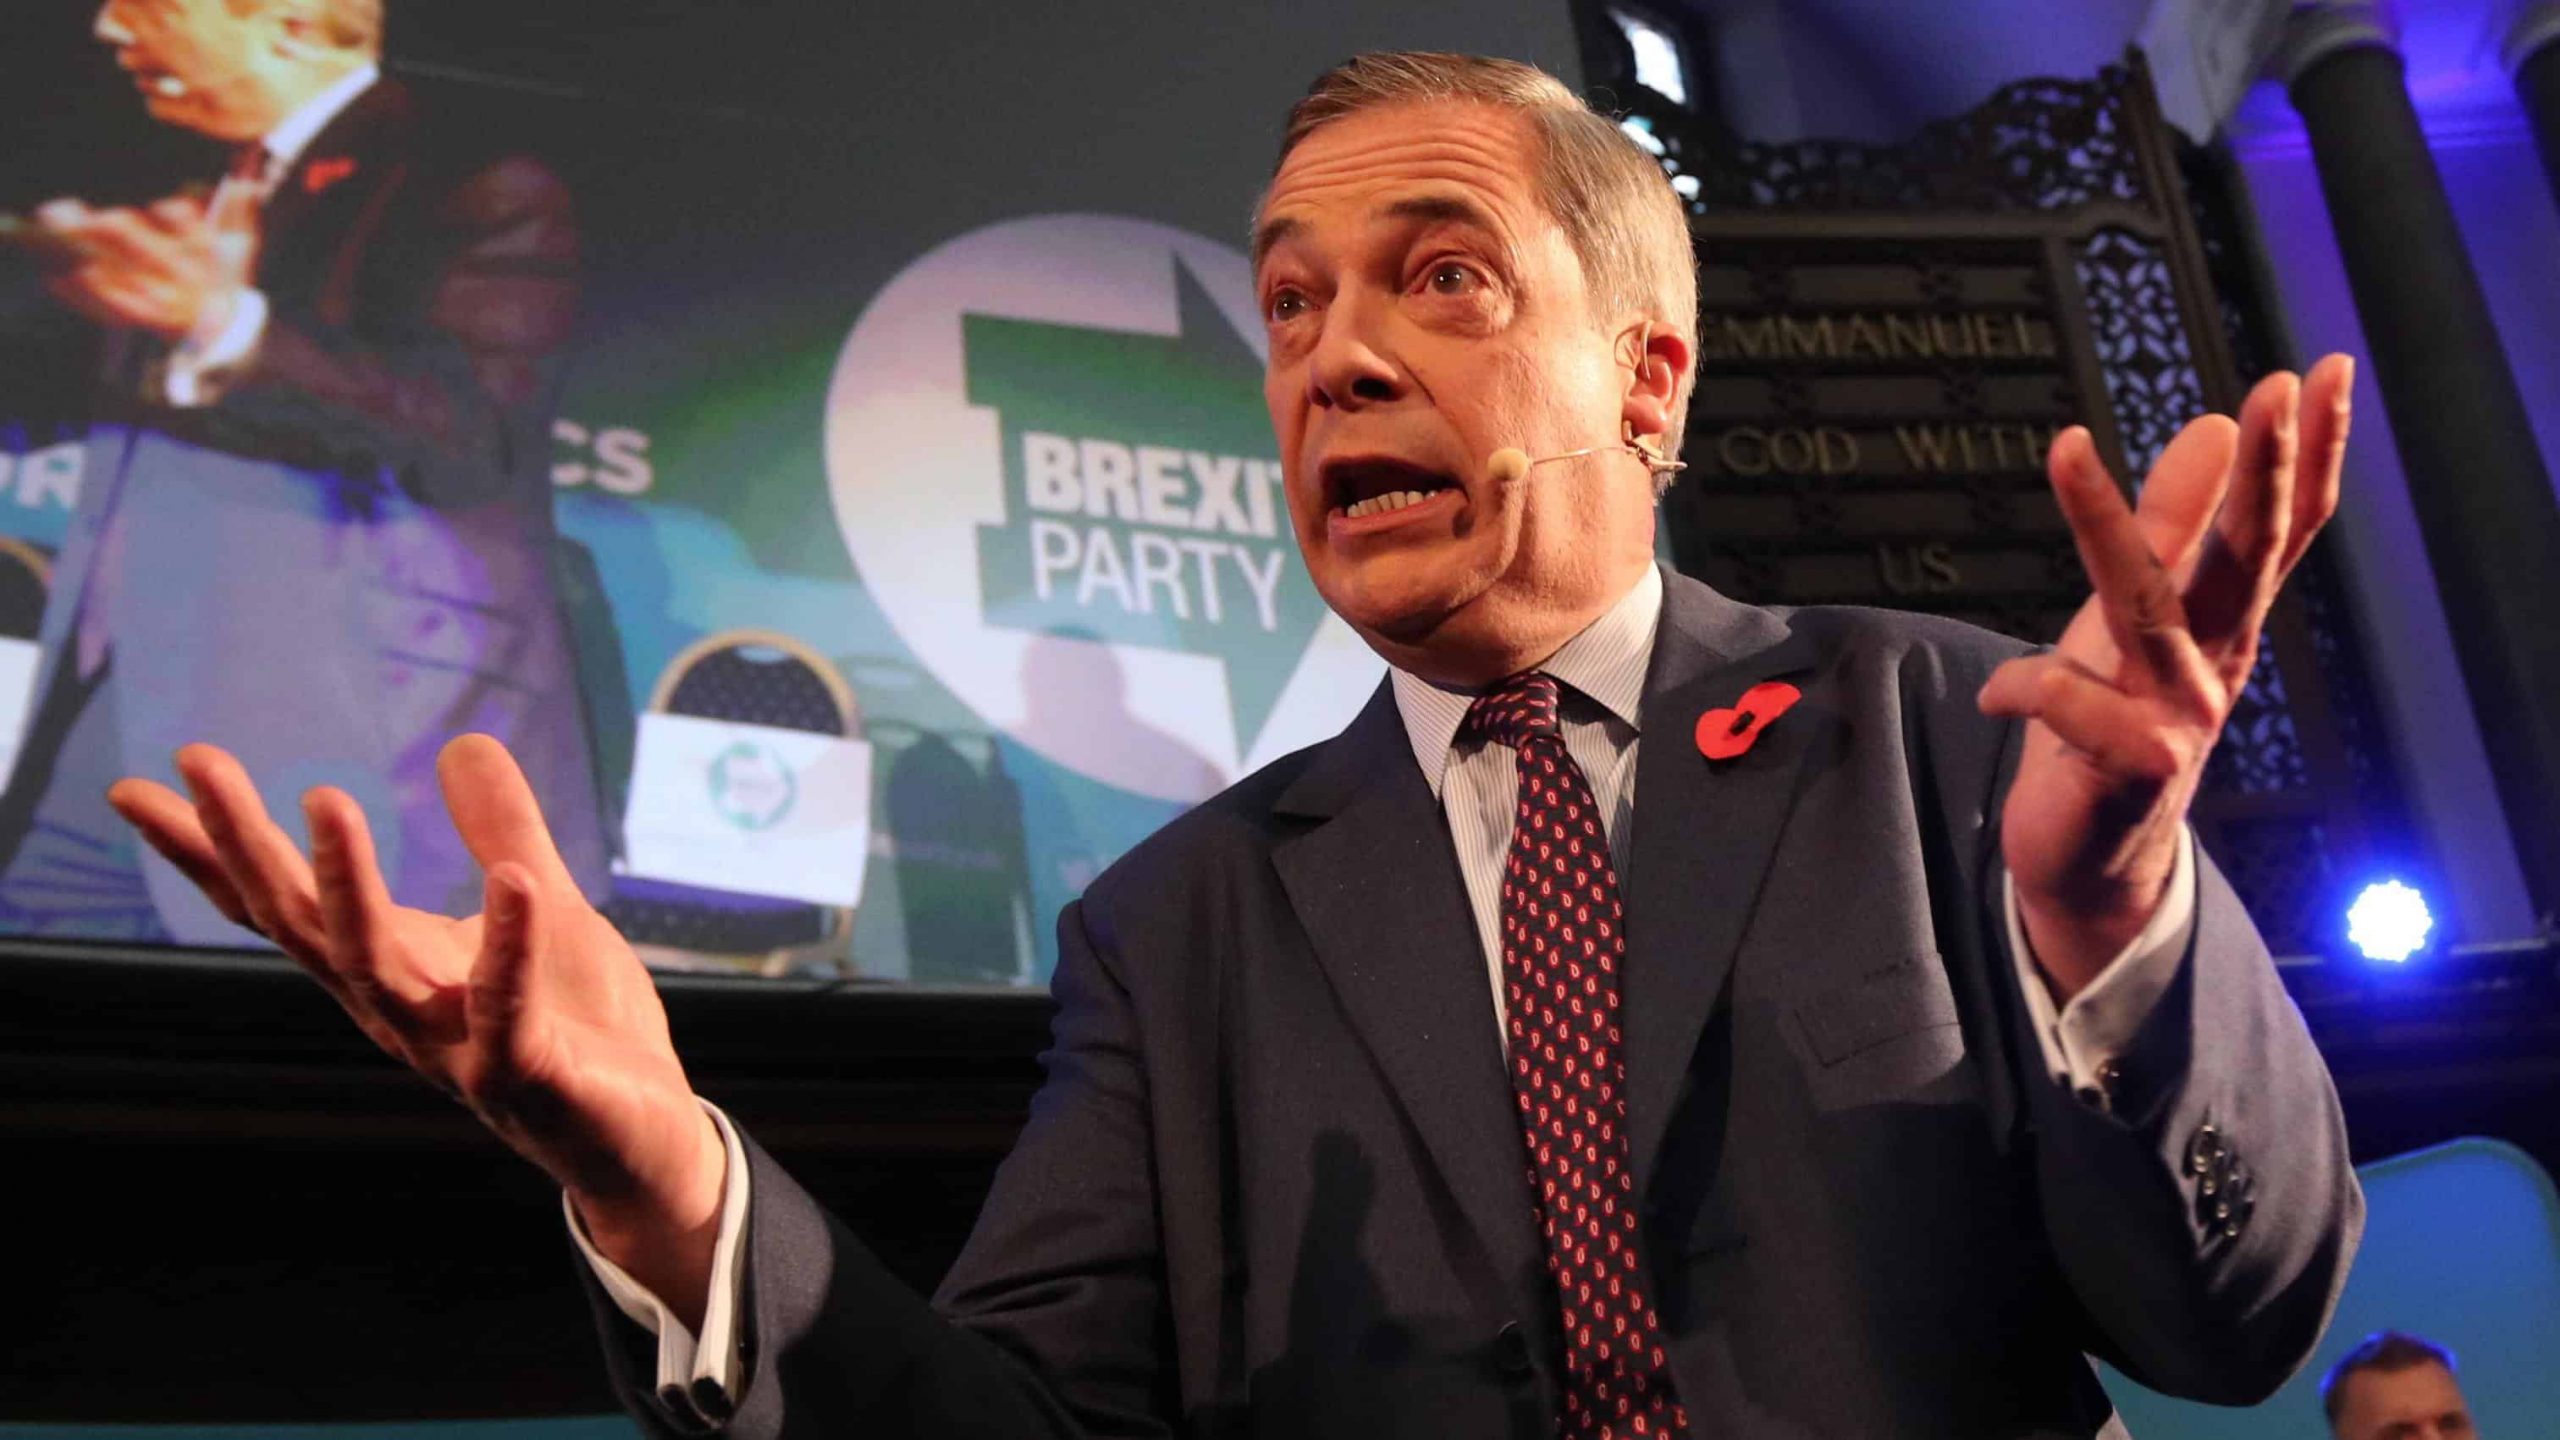 Nigel Farage vows to target five million Labour voters who backed Brexit